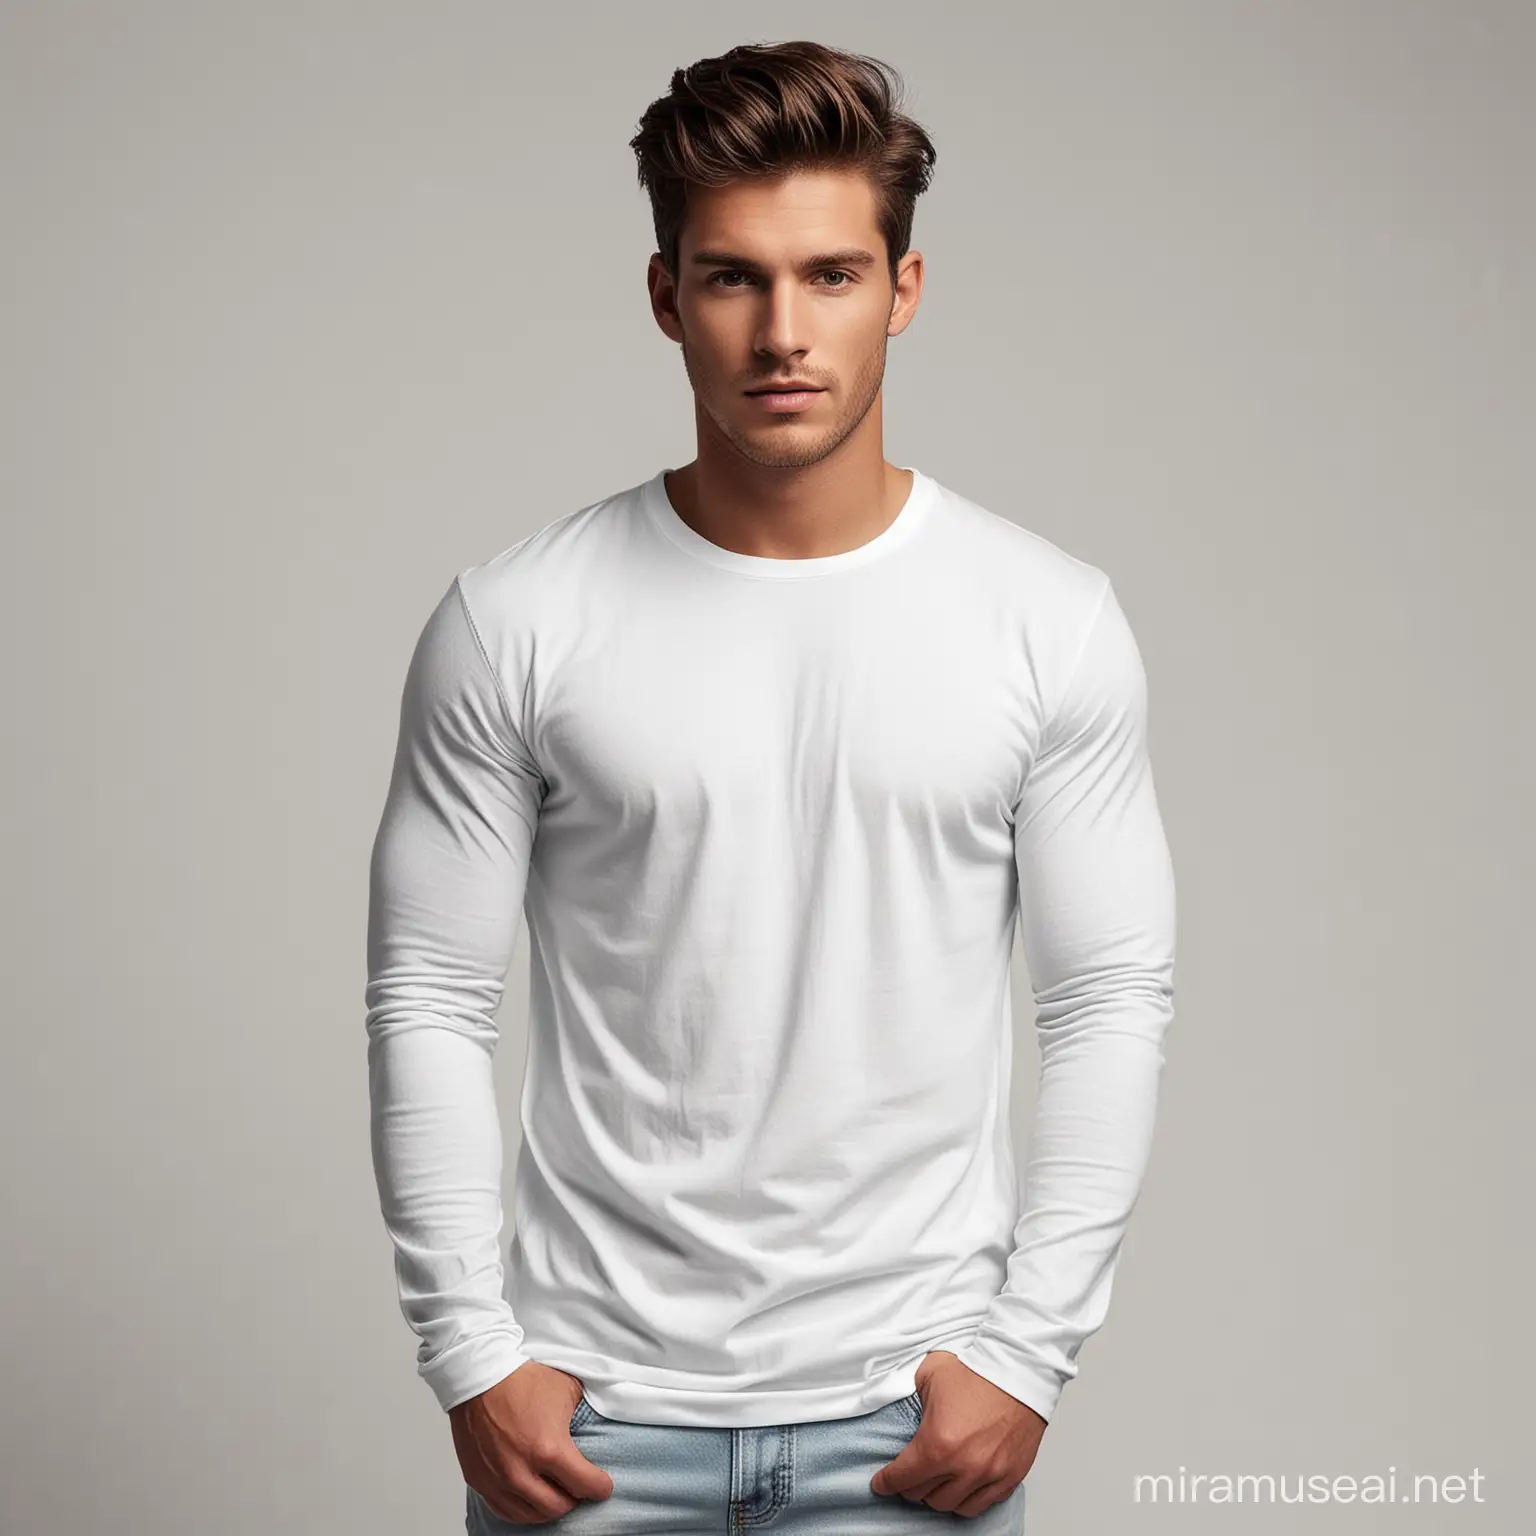 create for me male model wearing a white long sleeve without prints. See the whole body